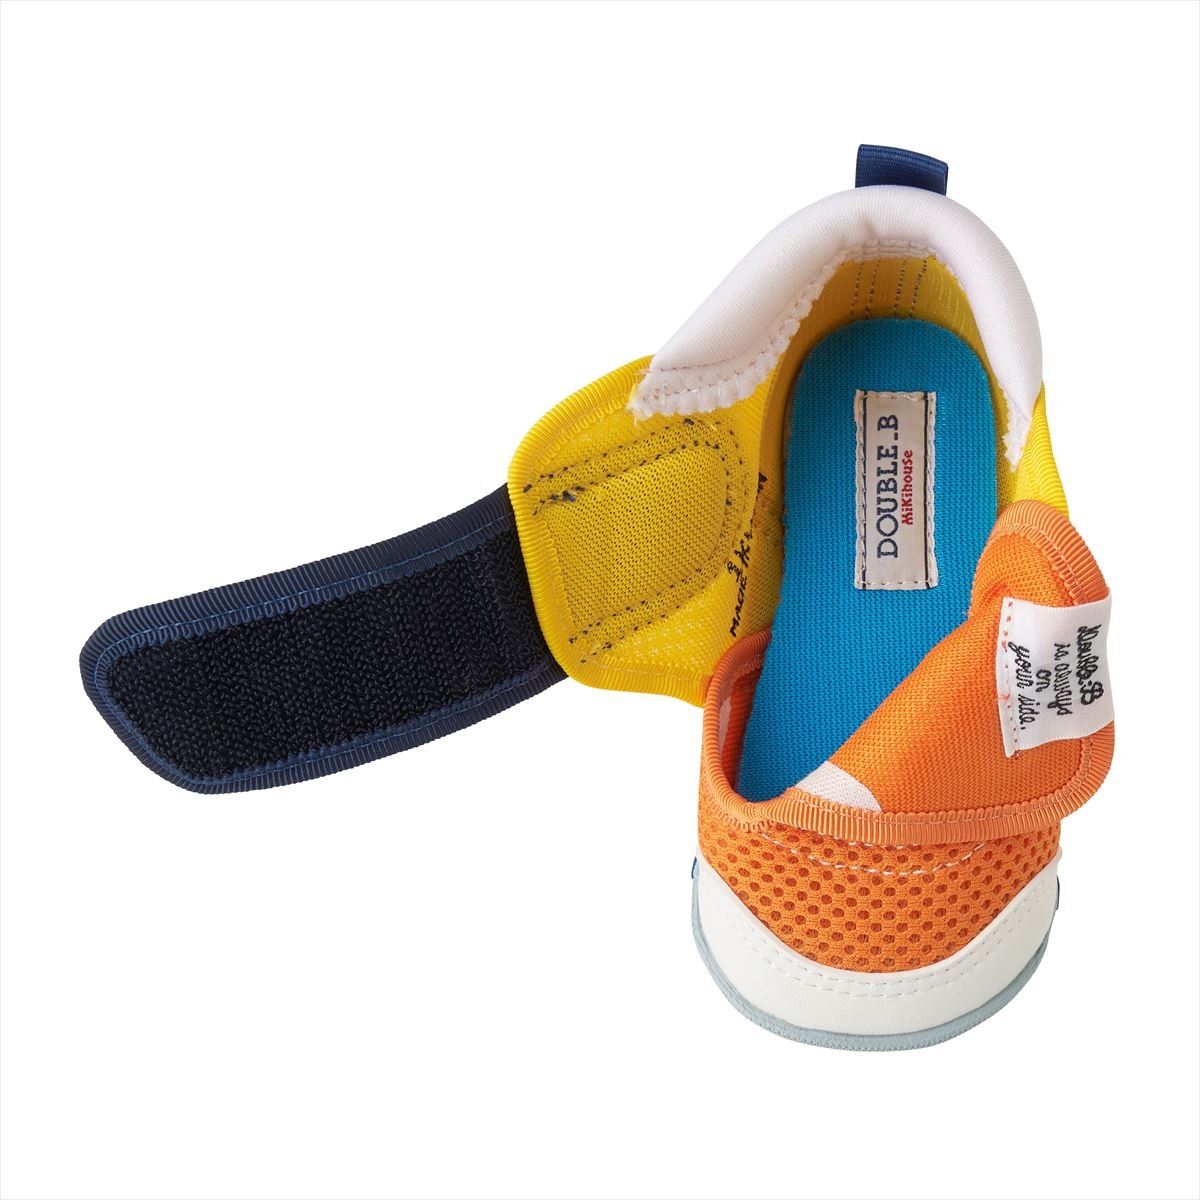 Double Russell Mesh First Shoes - B for Bold - 62-9302-572-87-11H